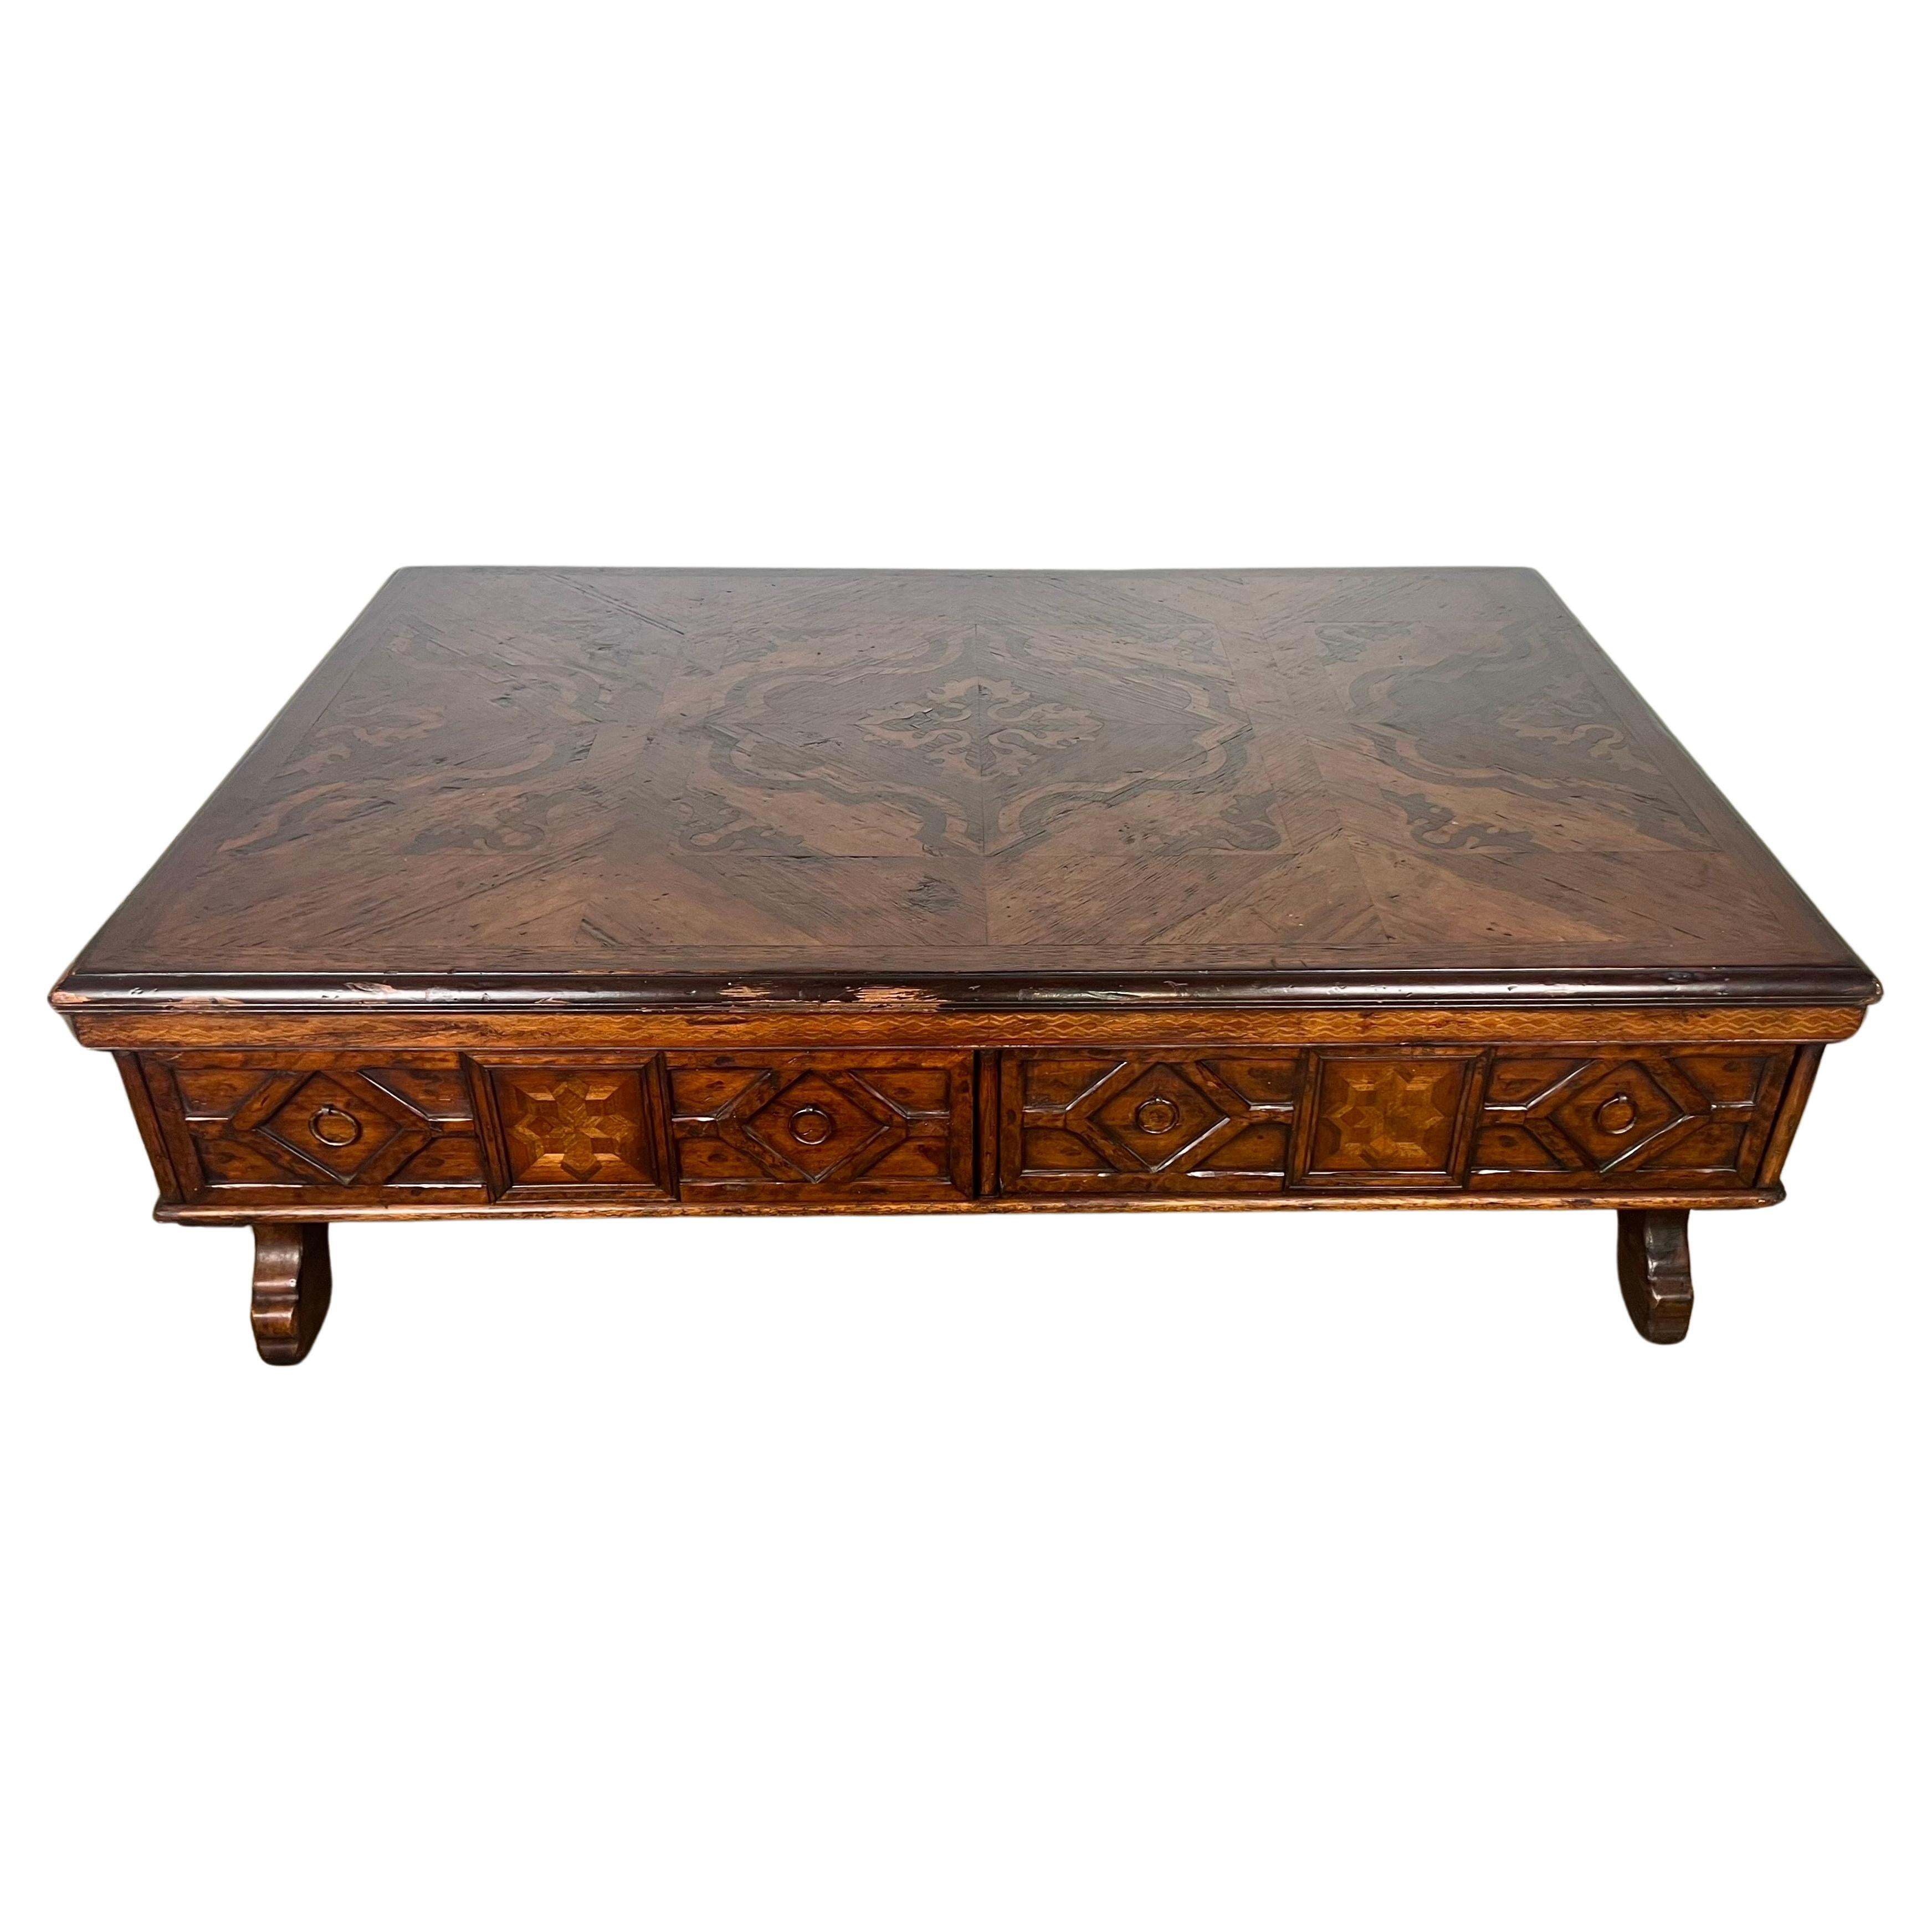 A monumental-sized Spanish coffee table with beautiful carving and an inlaid top featuring pine, walnut, and mahogany.  It is a stunning and functional piece of furniture.  With four drawers and four carved legs, it combines both beauty and